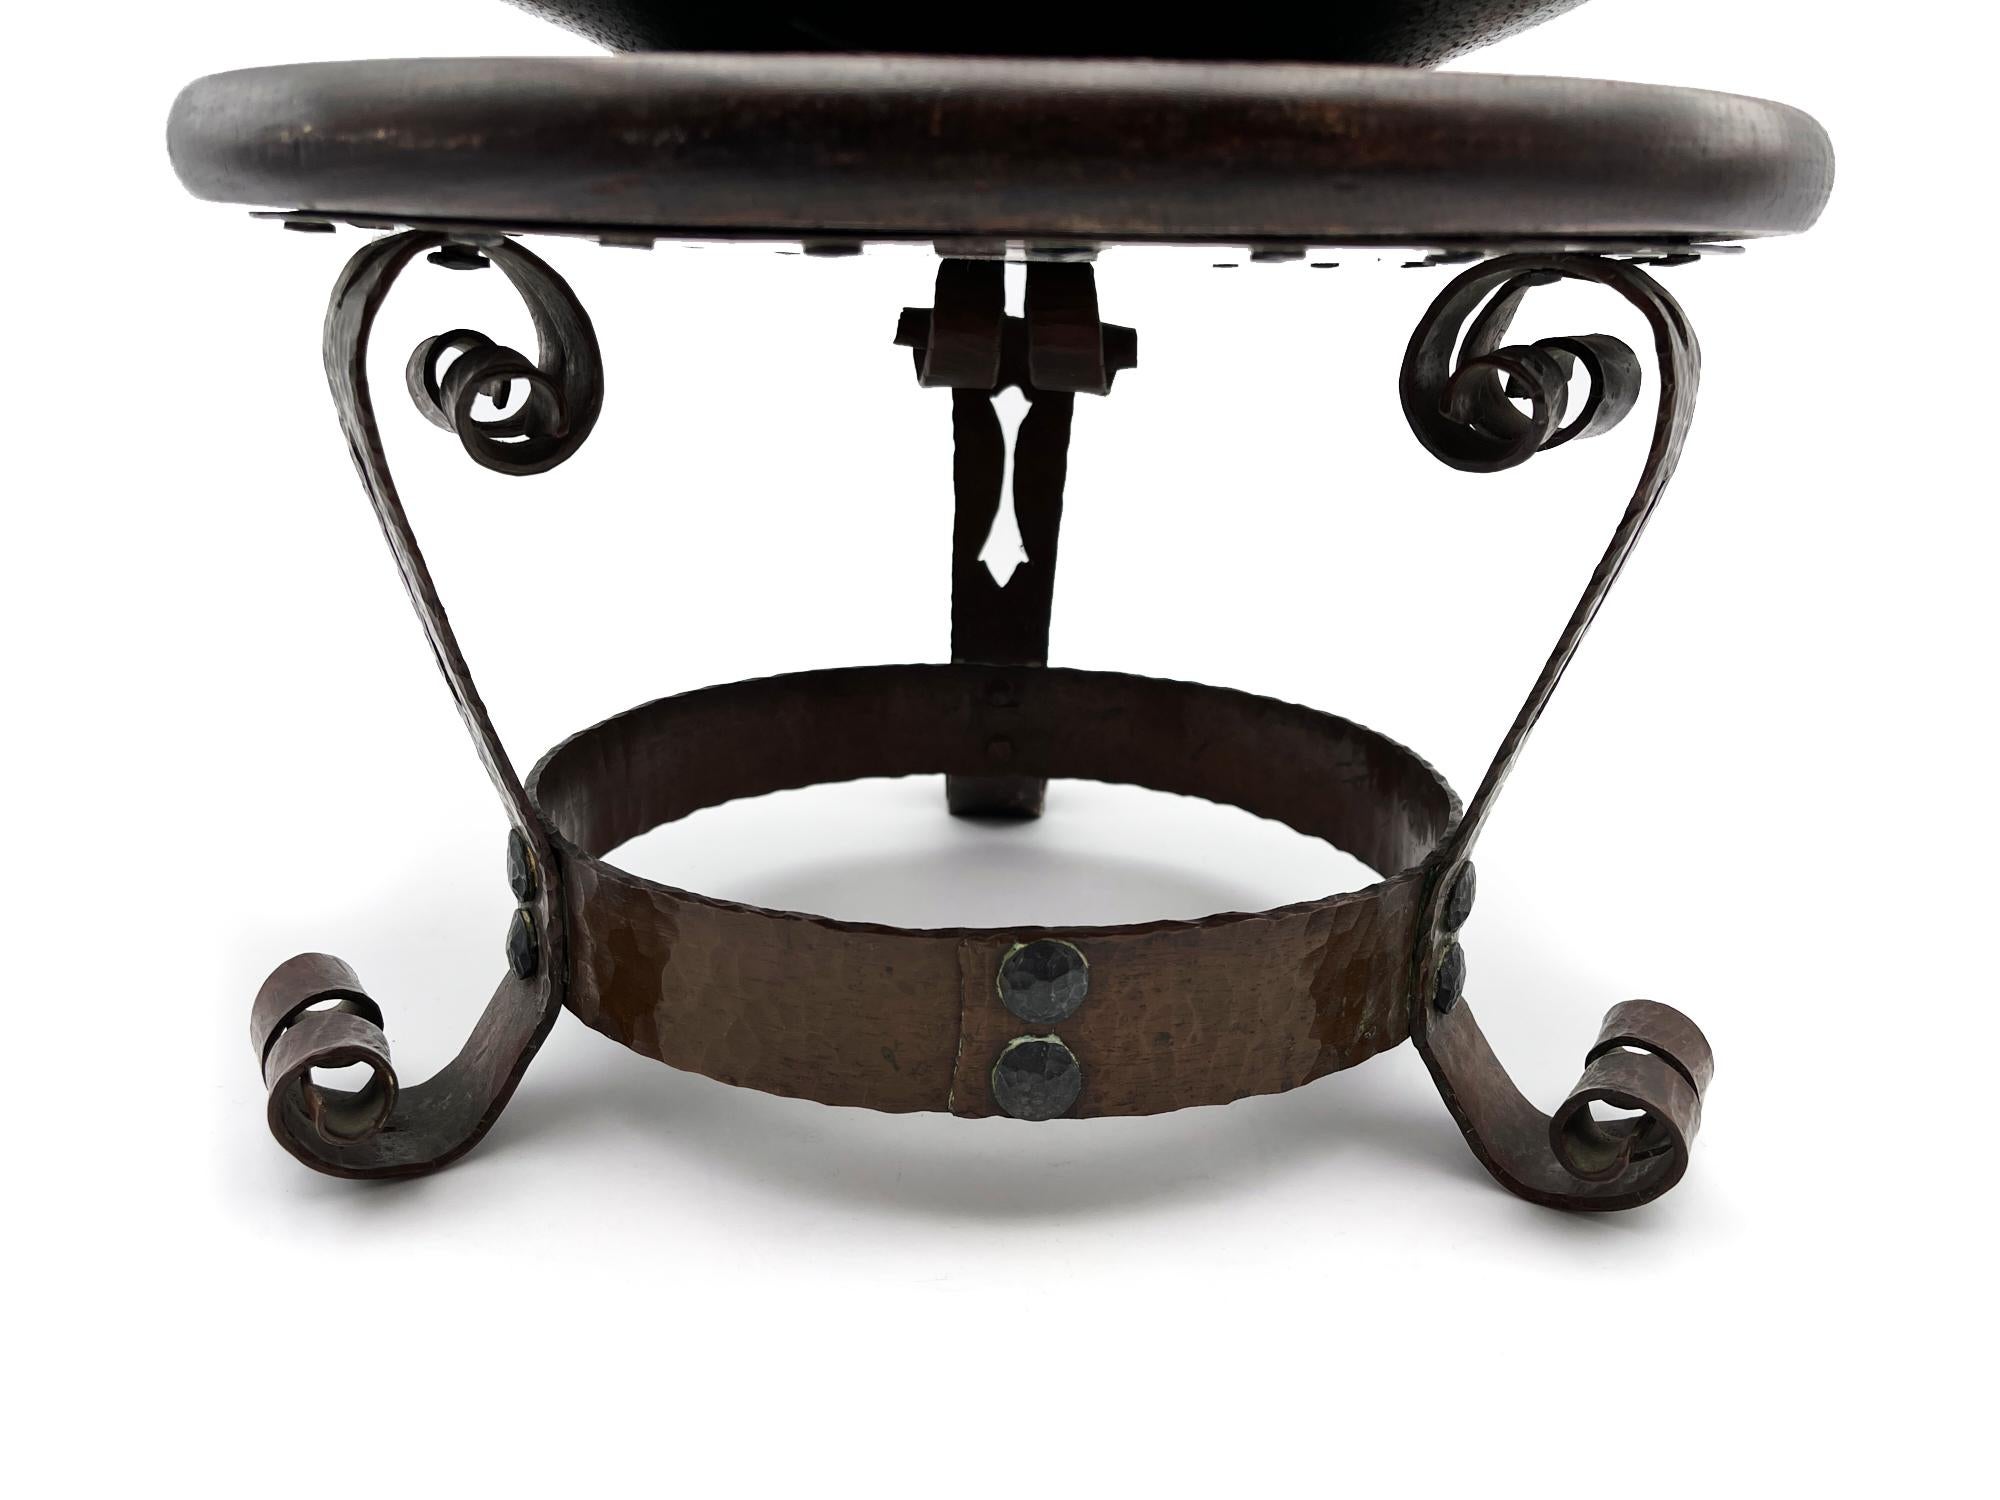 The rich oak stand has a solid copper plate base with curled copper legs and decorative nailhead detailing. It is paired with a low and lovely stylized 3 handled pottery bowl with a rich green crackle glaze and drainage hole in the bottom. (sold